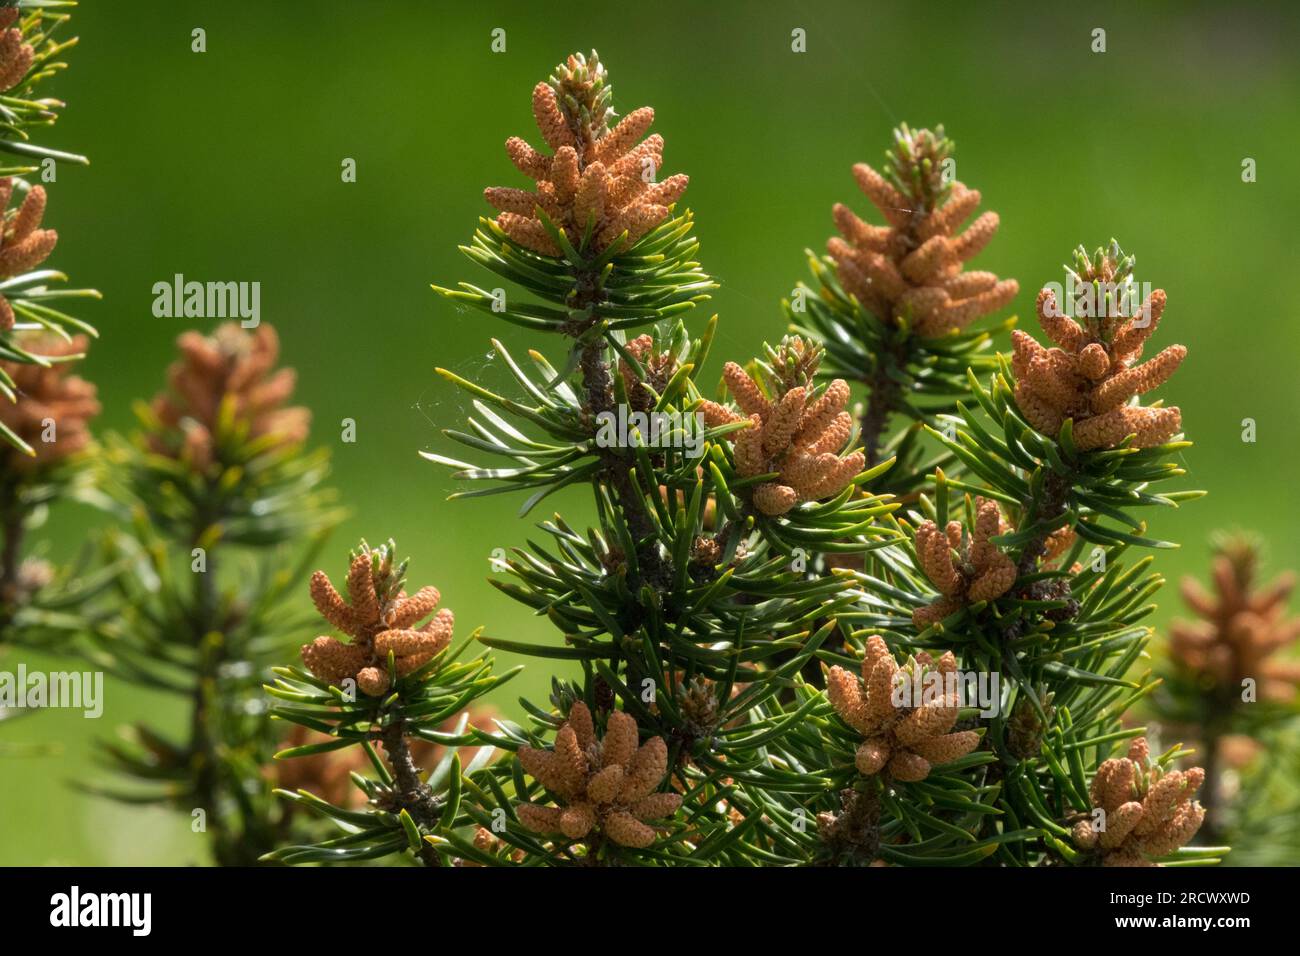 Pinus banksiana, Jack Pine, Male Cones closeup on branches Stock Photo